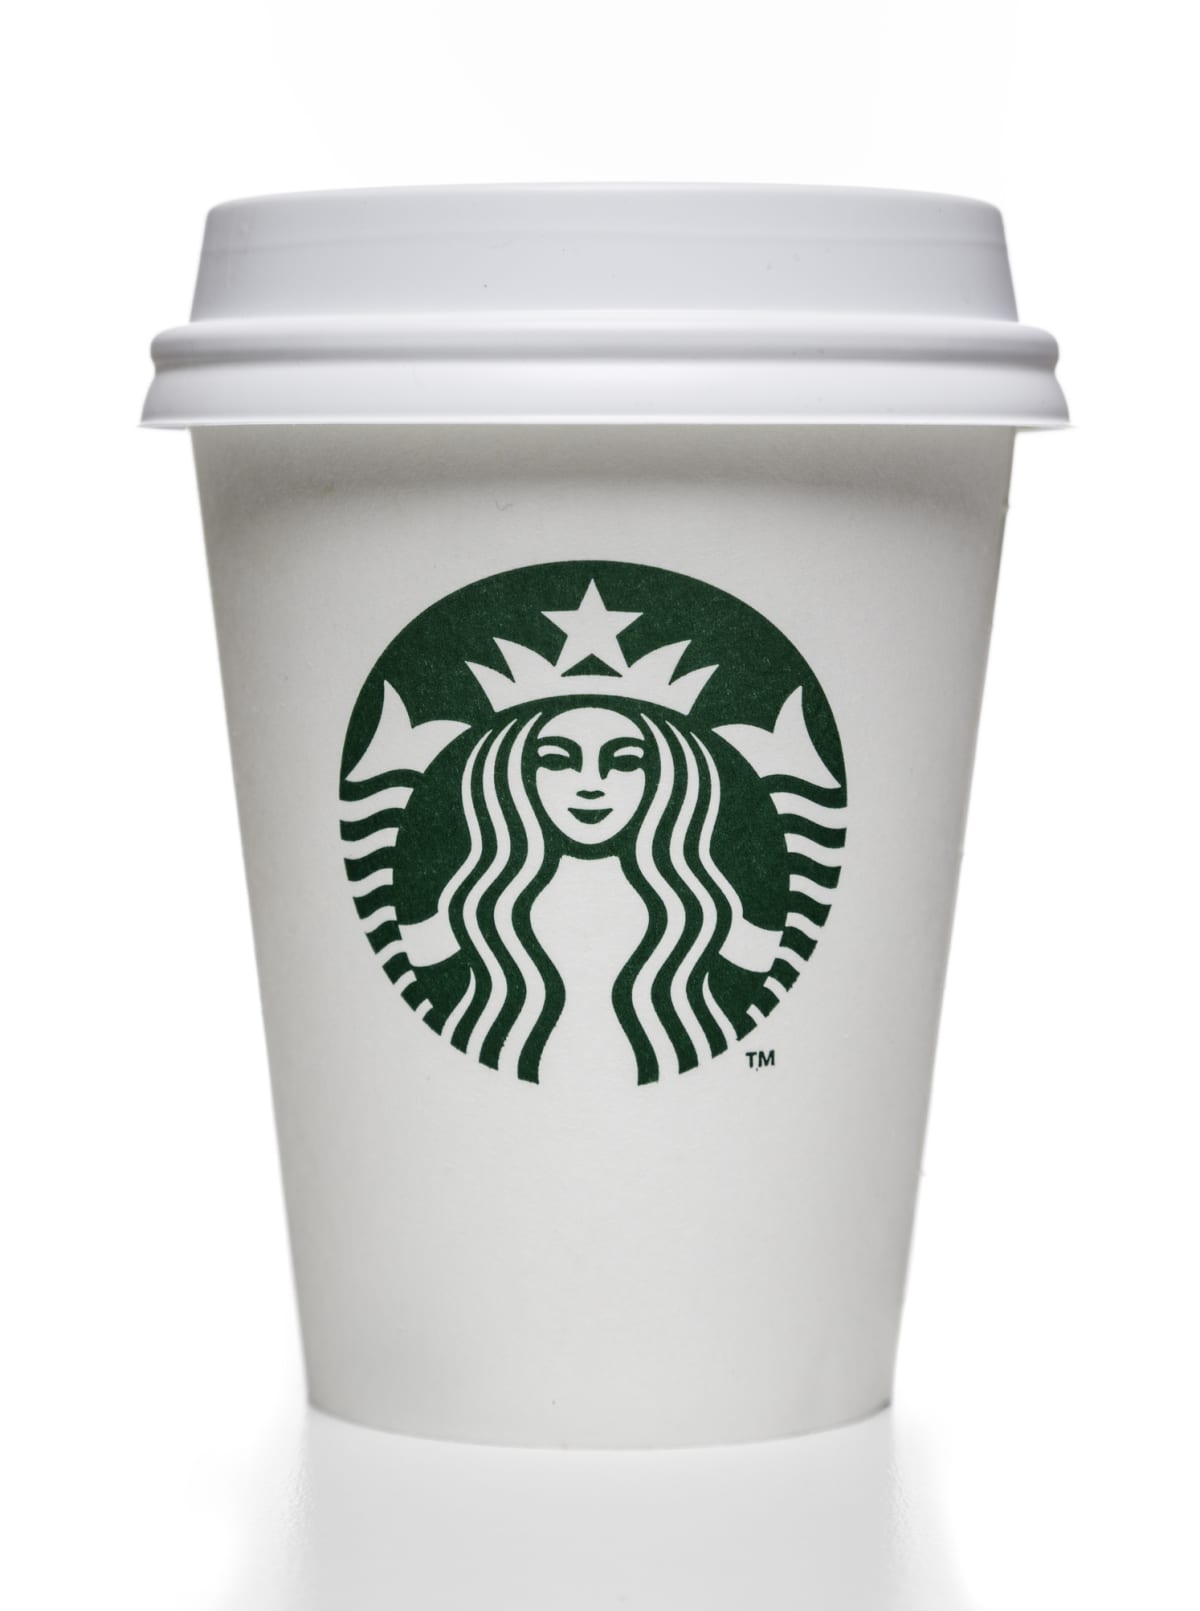 A Starbucks coffee cup with new designed green logo. Studio shot of tall size paper cup isolated on white background. Starbucks is an international coffee company based in Seattle, Washington.  It is the largest coffeehouse chain in the world, with almost 20 thousand stores in 58 countries"